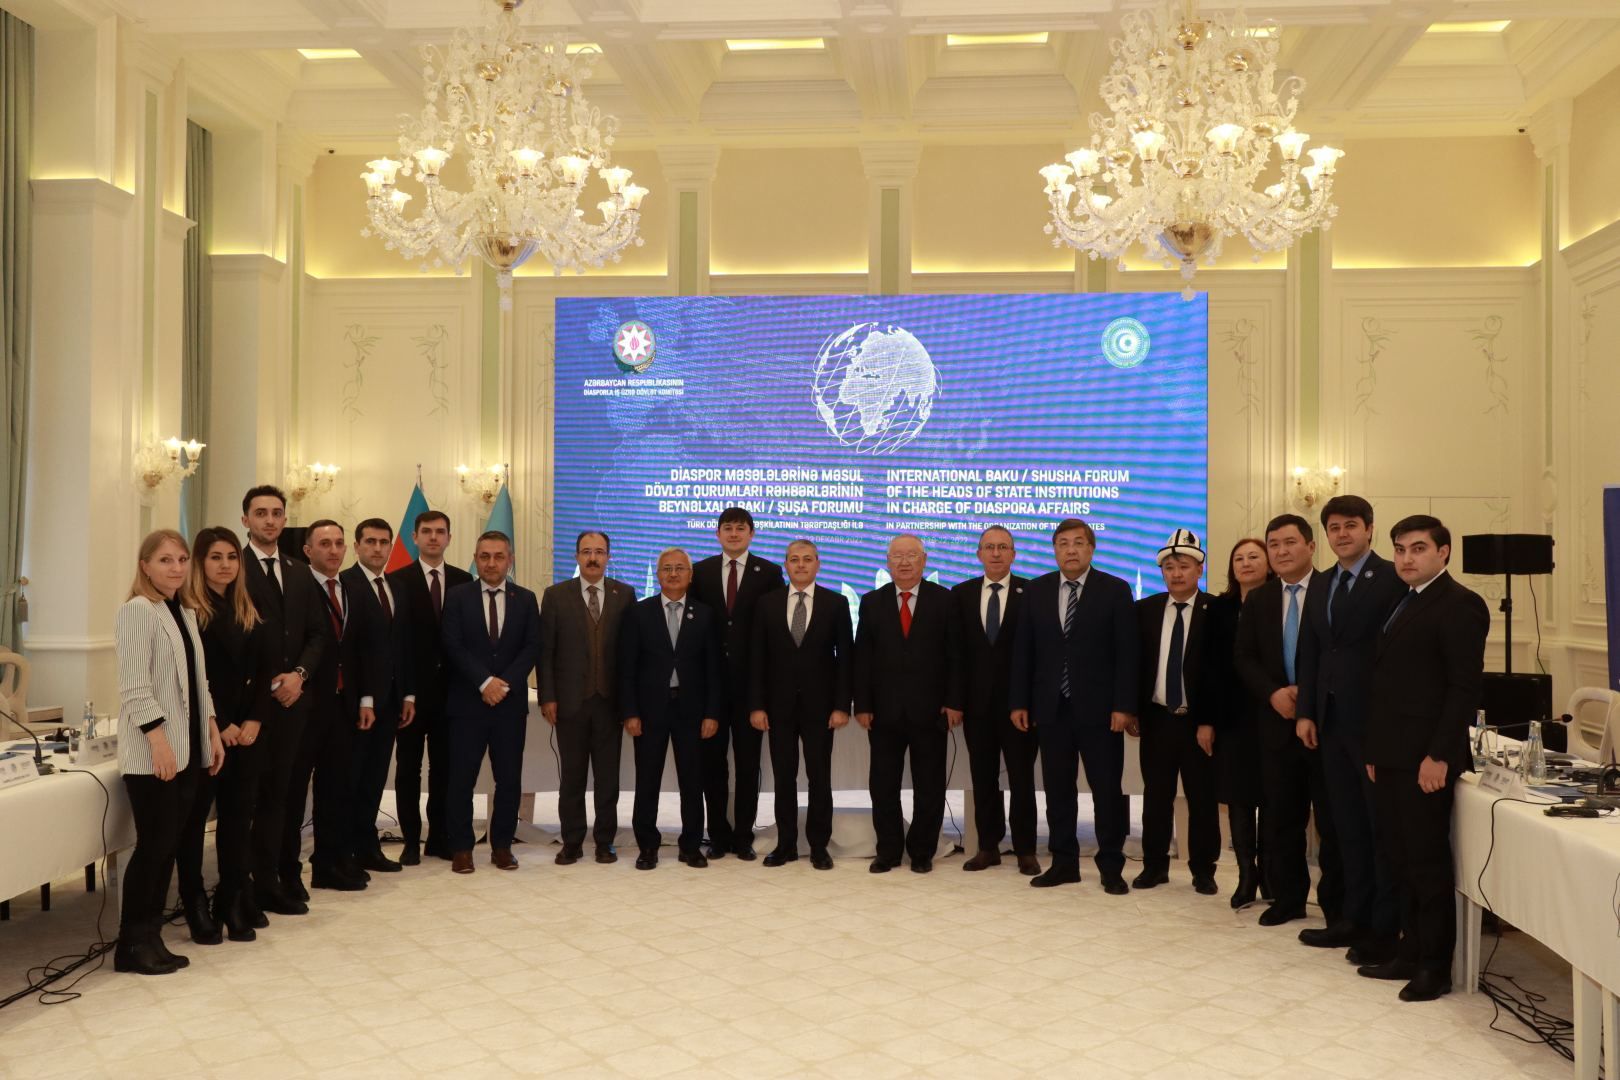 Official: Azerbaijan to further promote culture across Turkic nations [PHOTO]